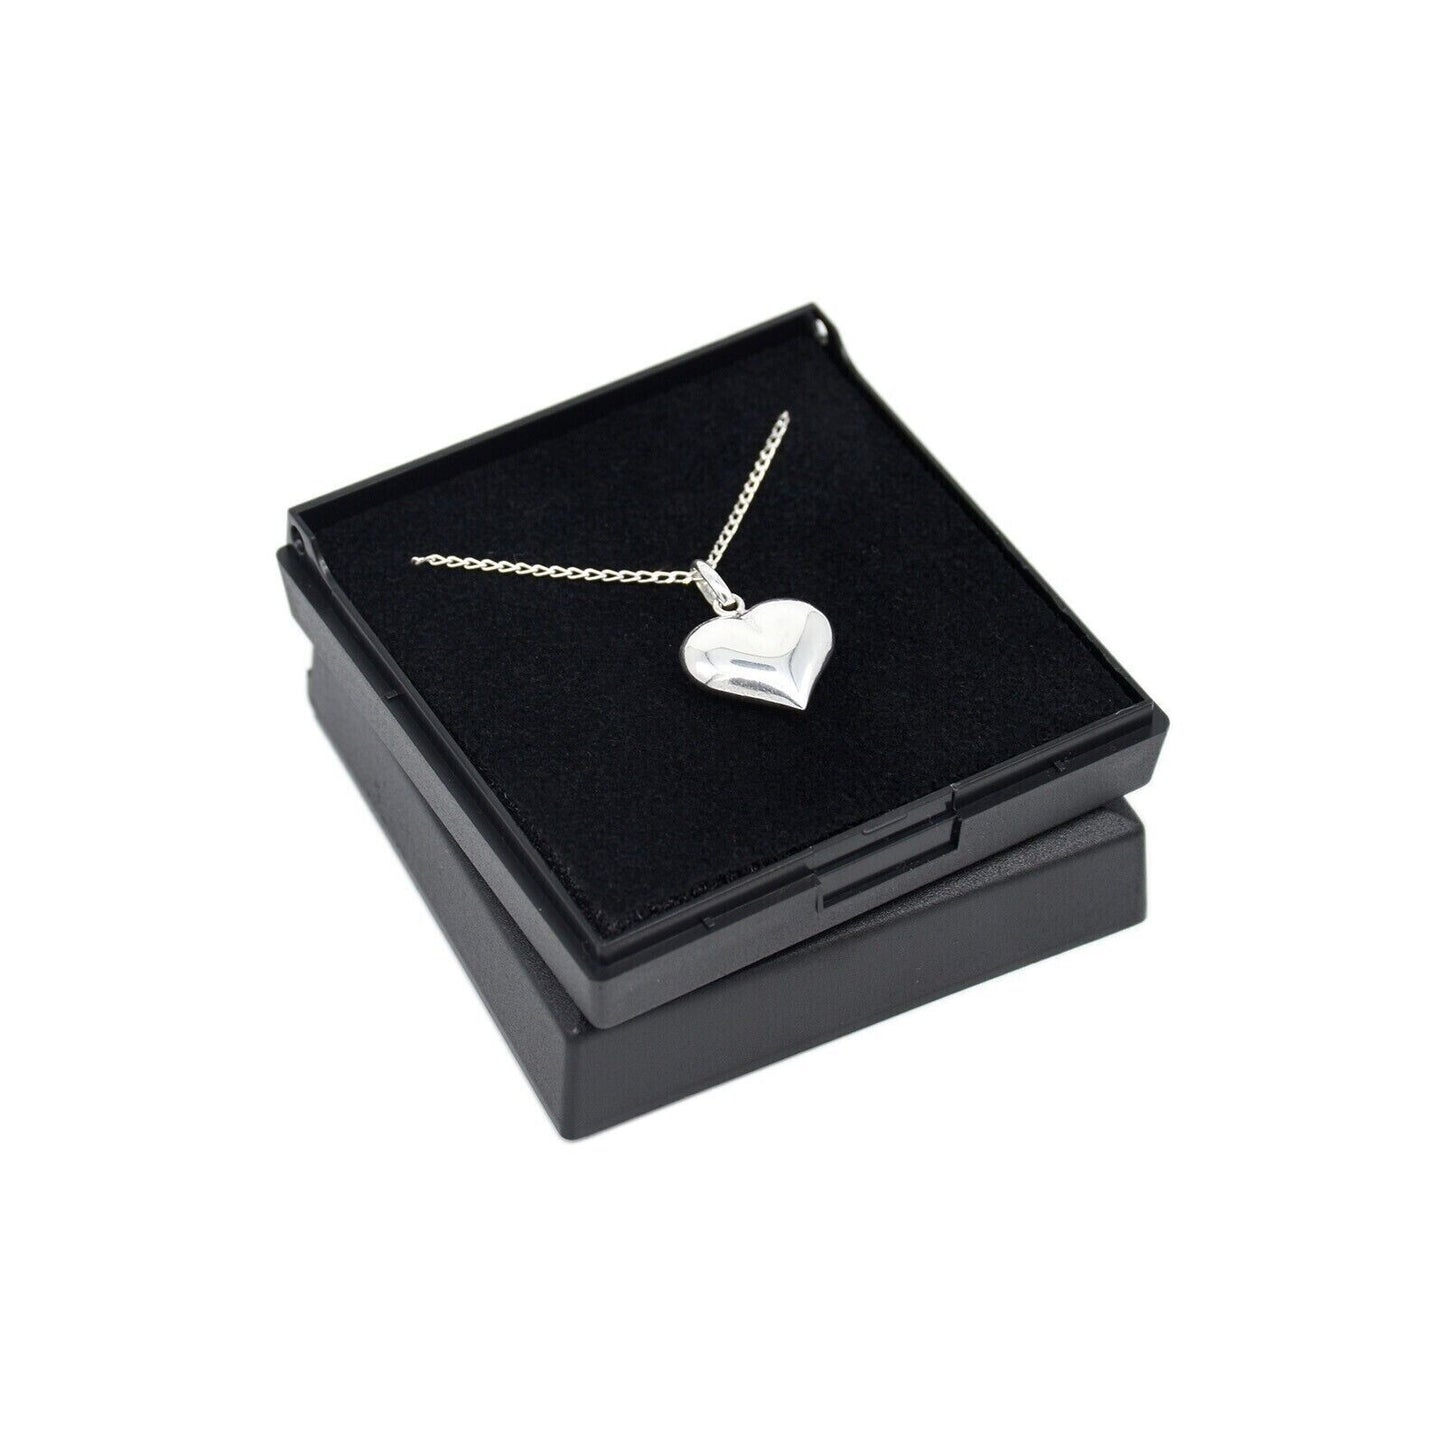 Genuine 925 Sterling Silver Puffed Heart Necklace In Gift Box